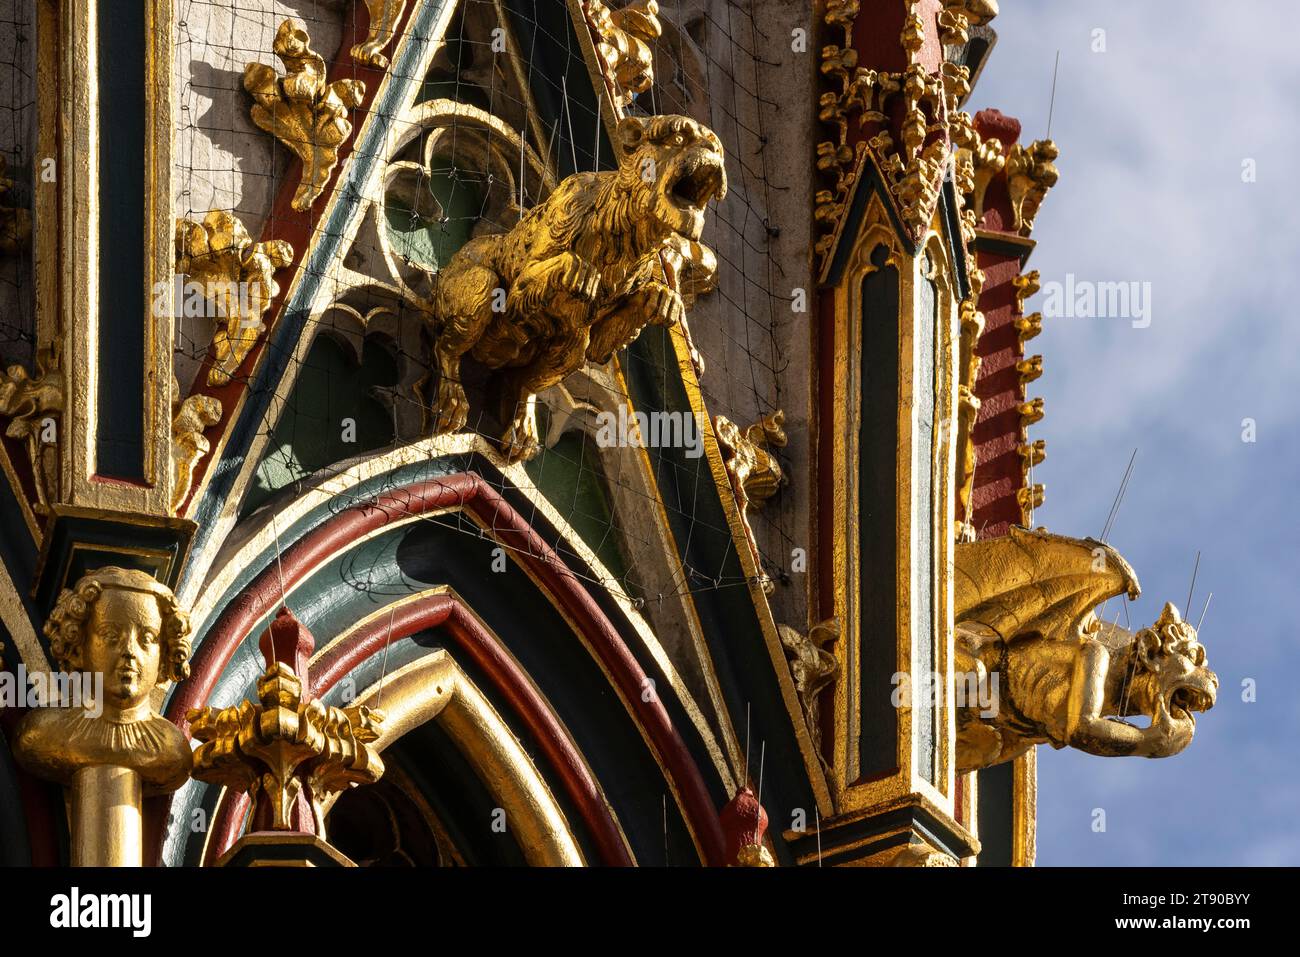 Painted and Gilt Schonnerbrunnen in Hauptmarkt Square, Nuremberg, Bavaria, Germany Stock Photo